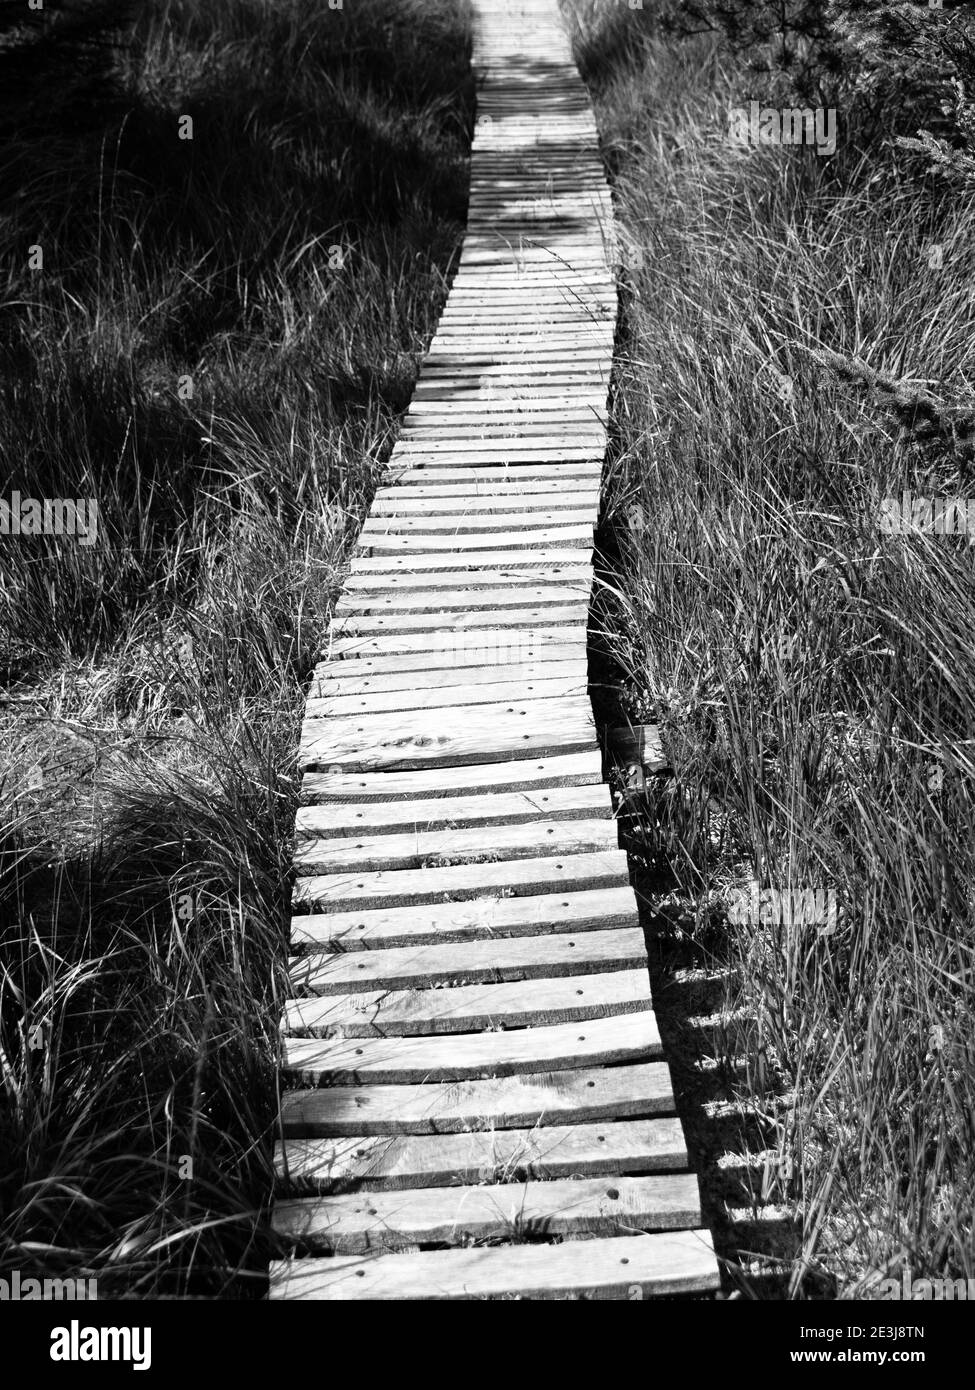 Narrow wooden hiking trail in the grass of peat bog area, Georgenfelder Hochmoor, Germany, black and white image Stock Photo